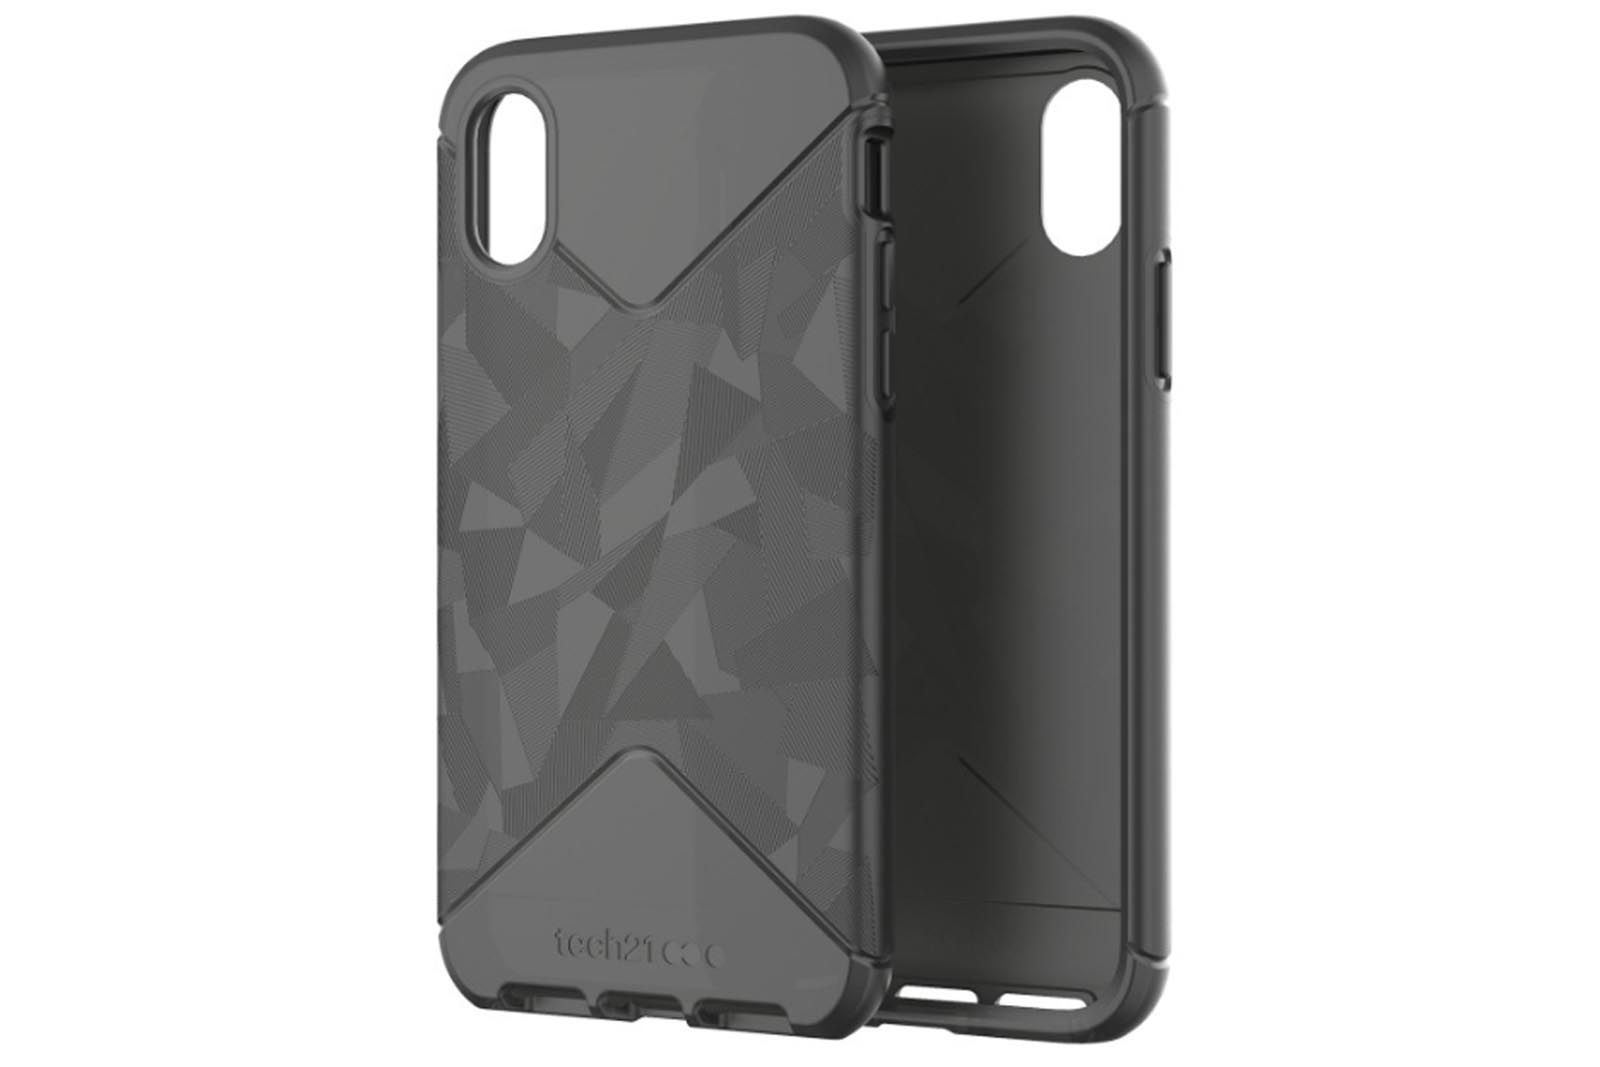 Best Iphone X Cases Protect Your New Apple Device image 15